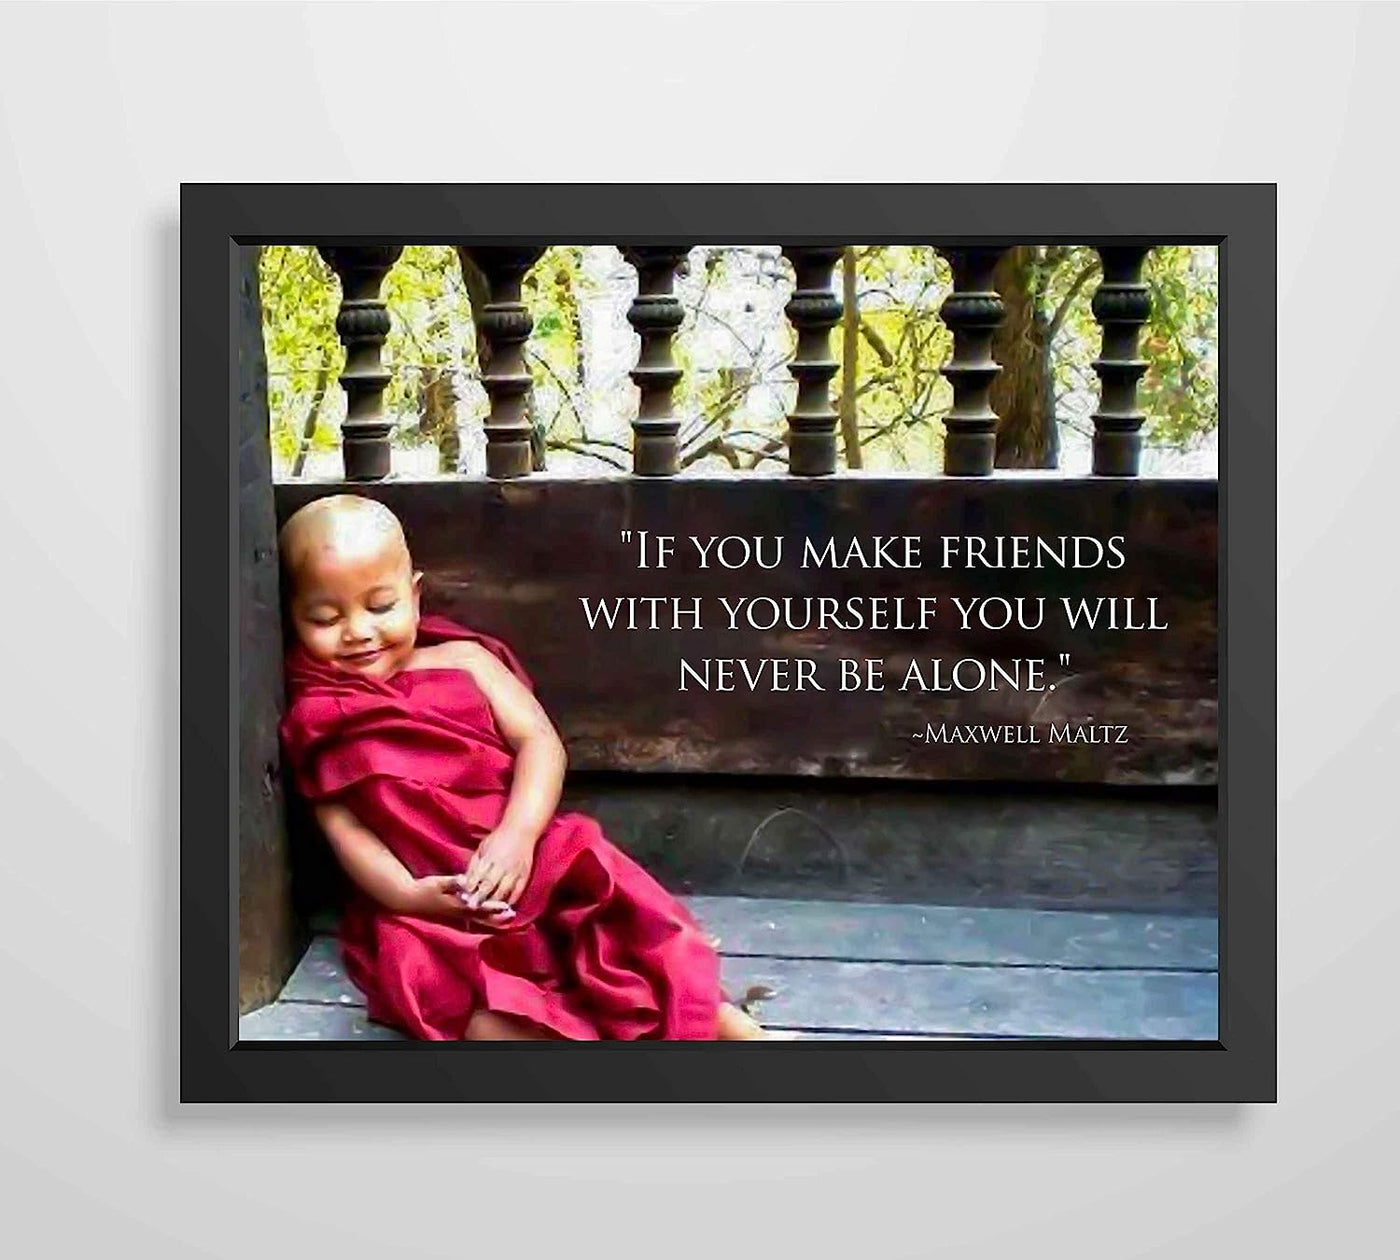 If You Make Friends With Yourself-Will Never Be Alone-Maxwell Maltz Inspirational Quotes Wall Art-10 x 8" Motivational Poster Print -Ready to Frame. Perfect Home-Office-School-Classroom-Decor!